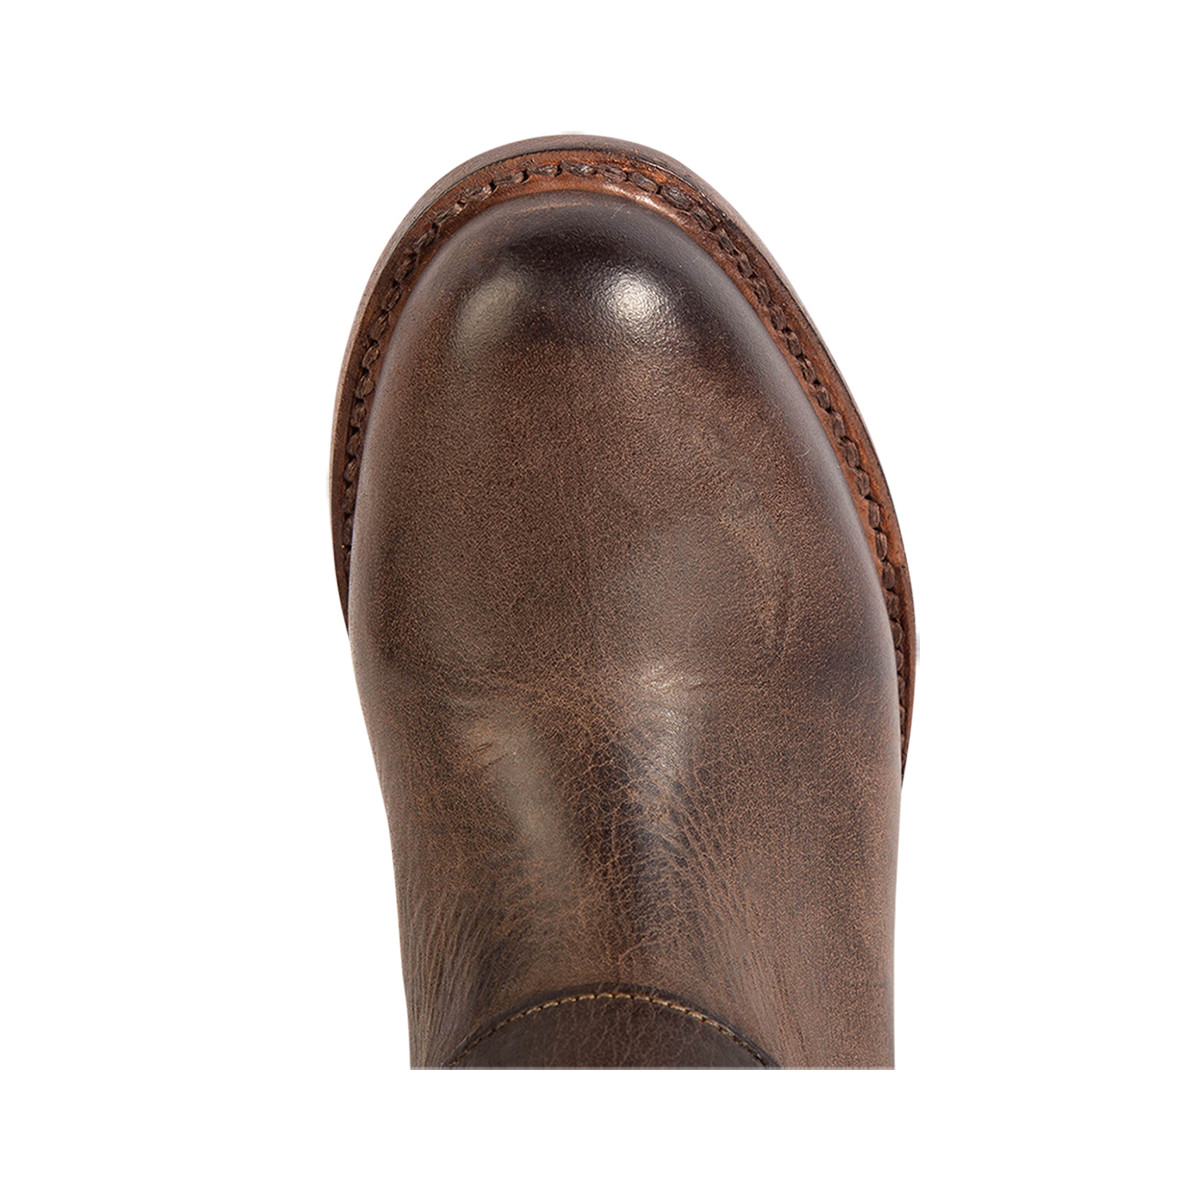 Top view showing round toe on FREEBIRD women's Risky brown fold-over leather boot